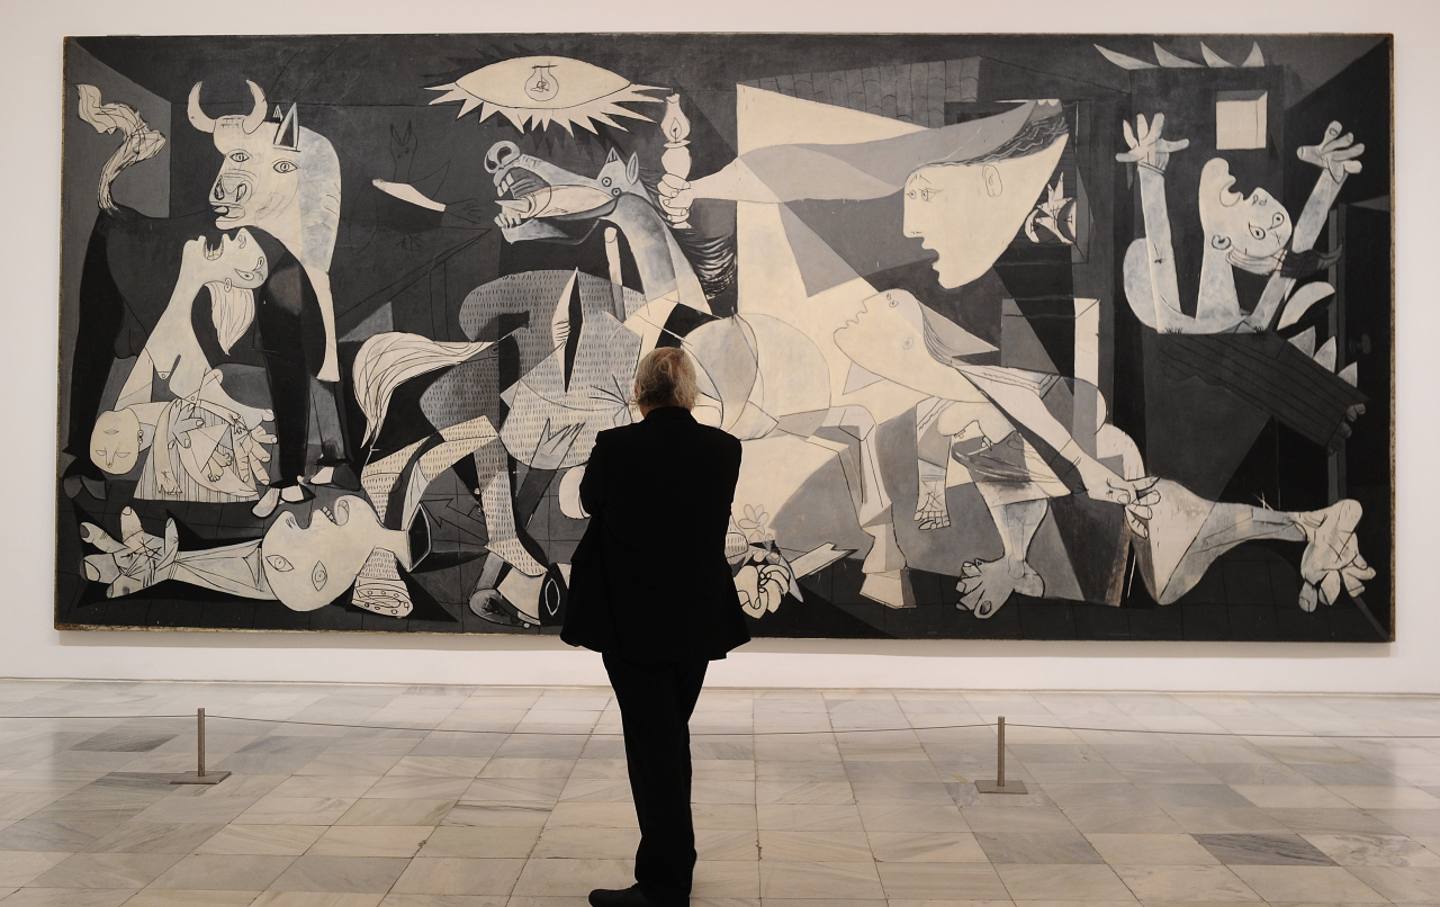 A person views Pablo Picasso’s “Guernica” at the Museo Reina Sofia in Madrid on April 3, 2017.